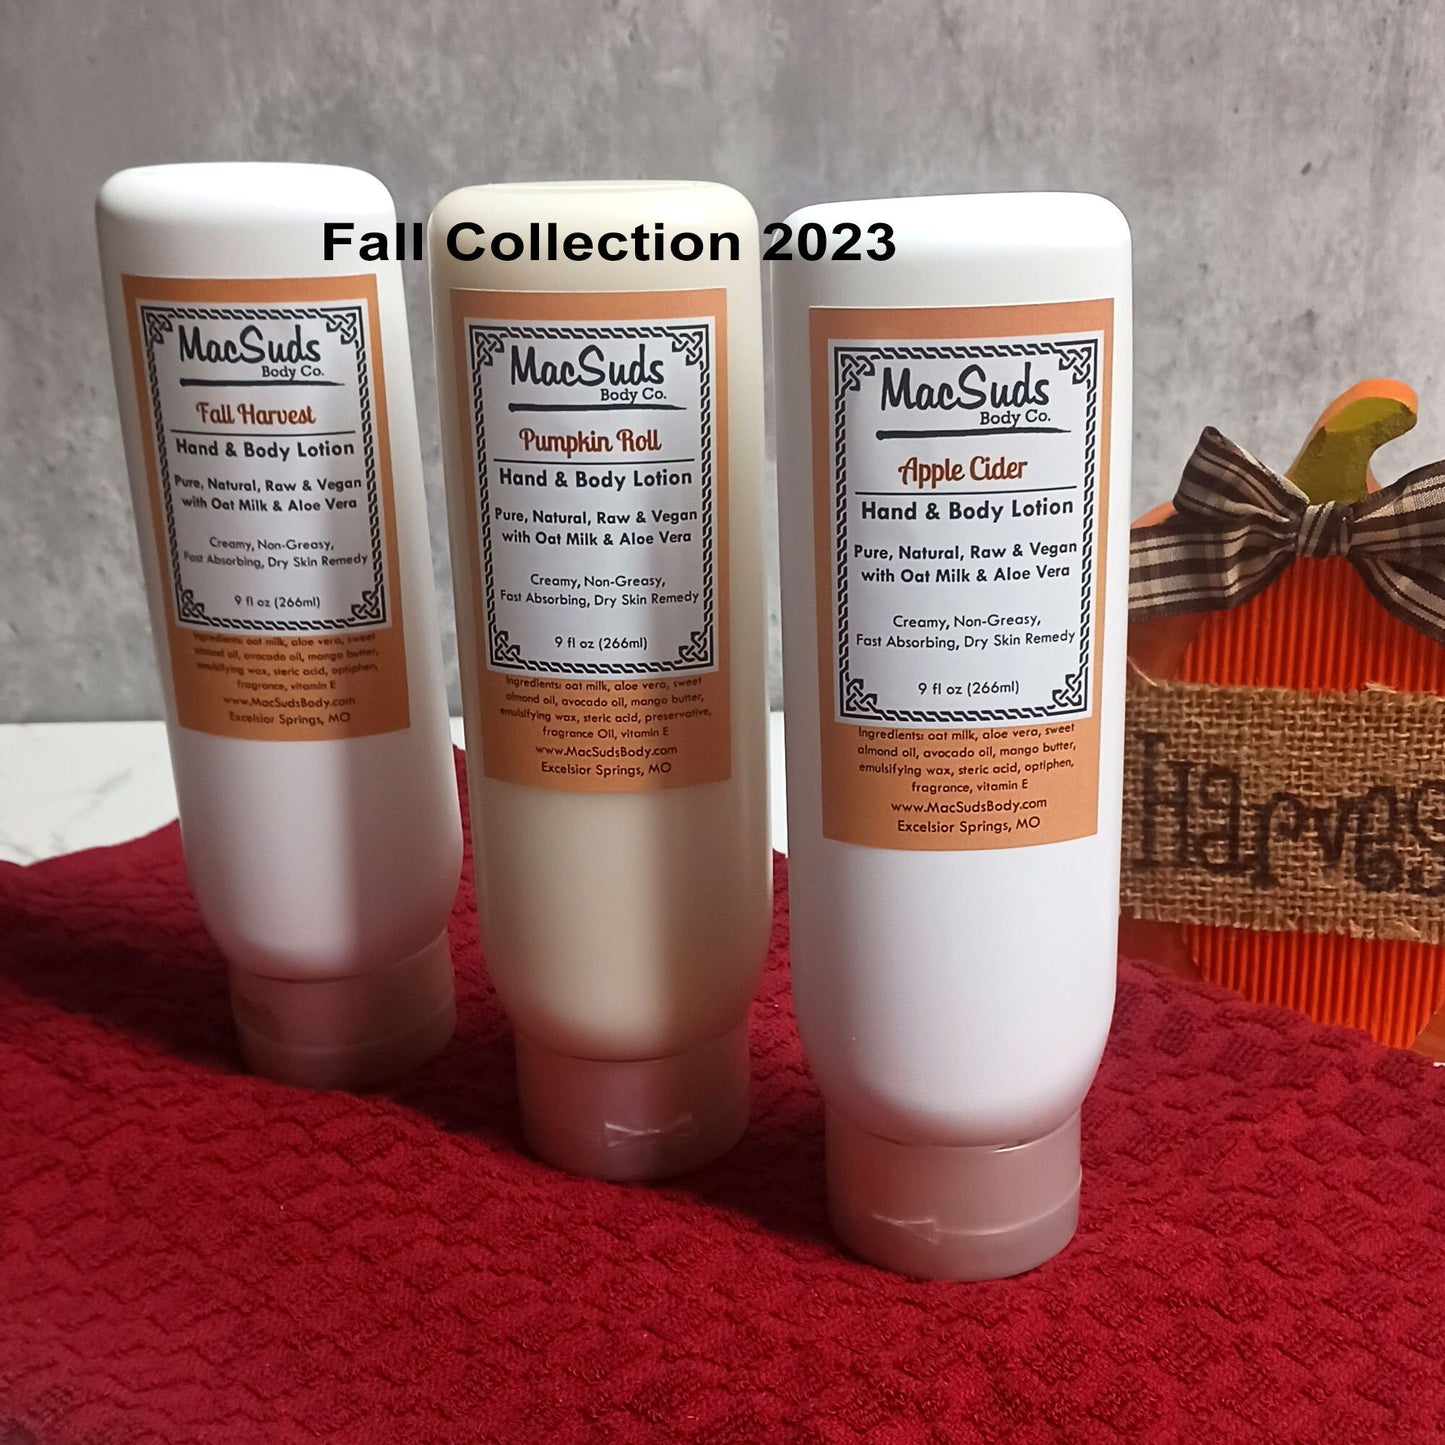 Fall Harvest Hand and Body Moisturizing Lotion with Oak Milk